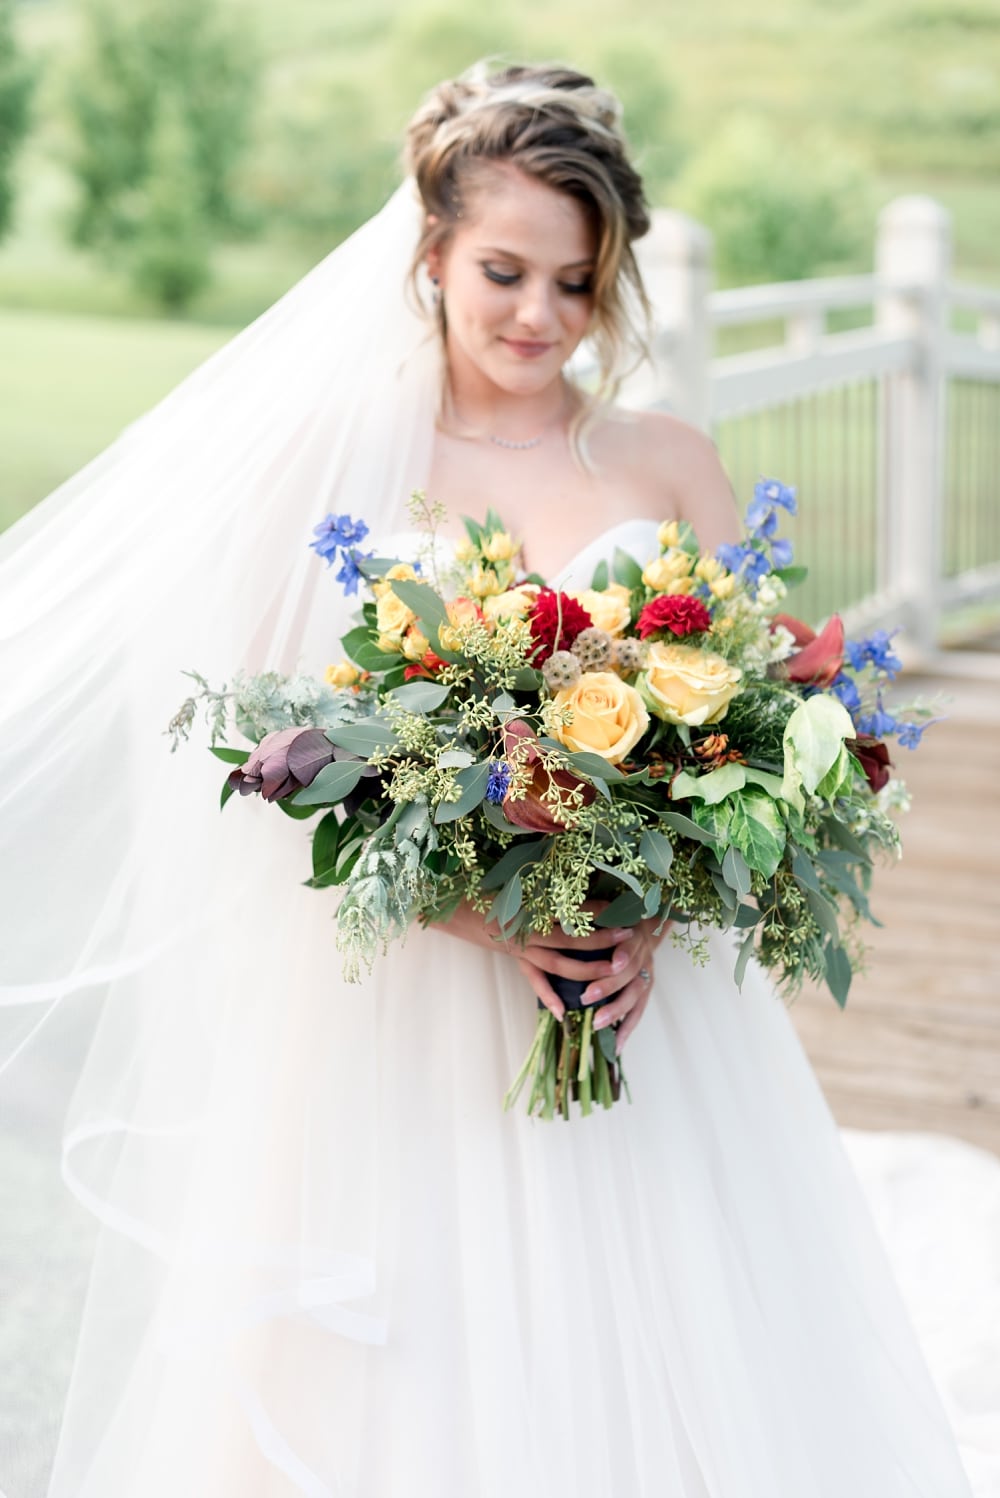 Bride and bridal bouquet by Good Earth Flowers VA in Culpeper VA